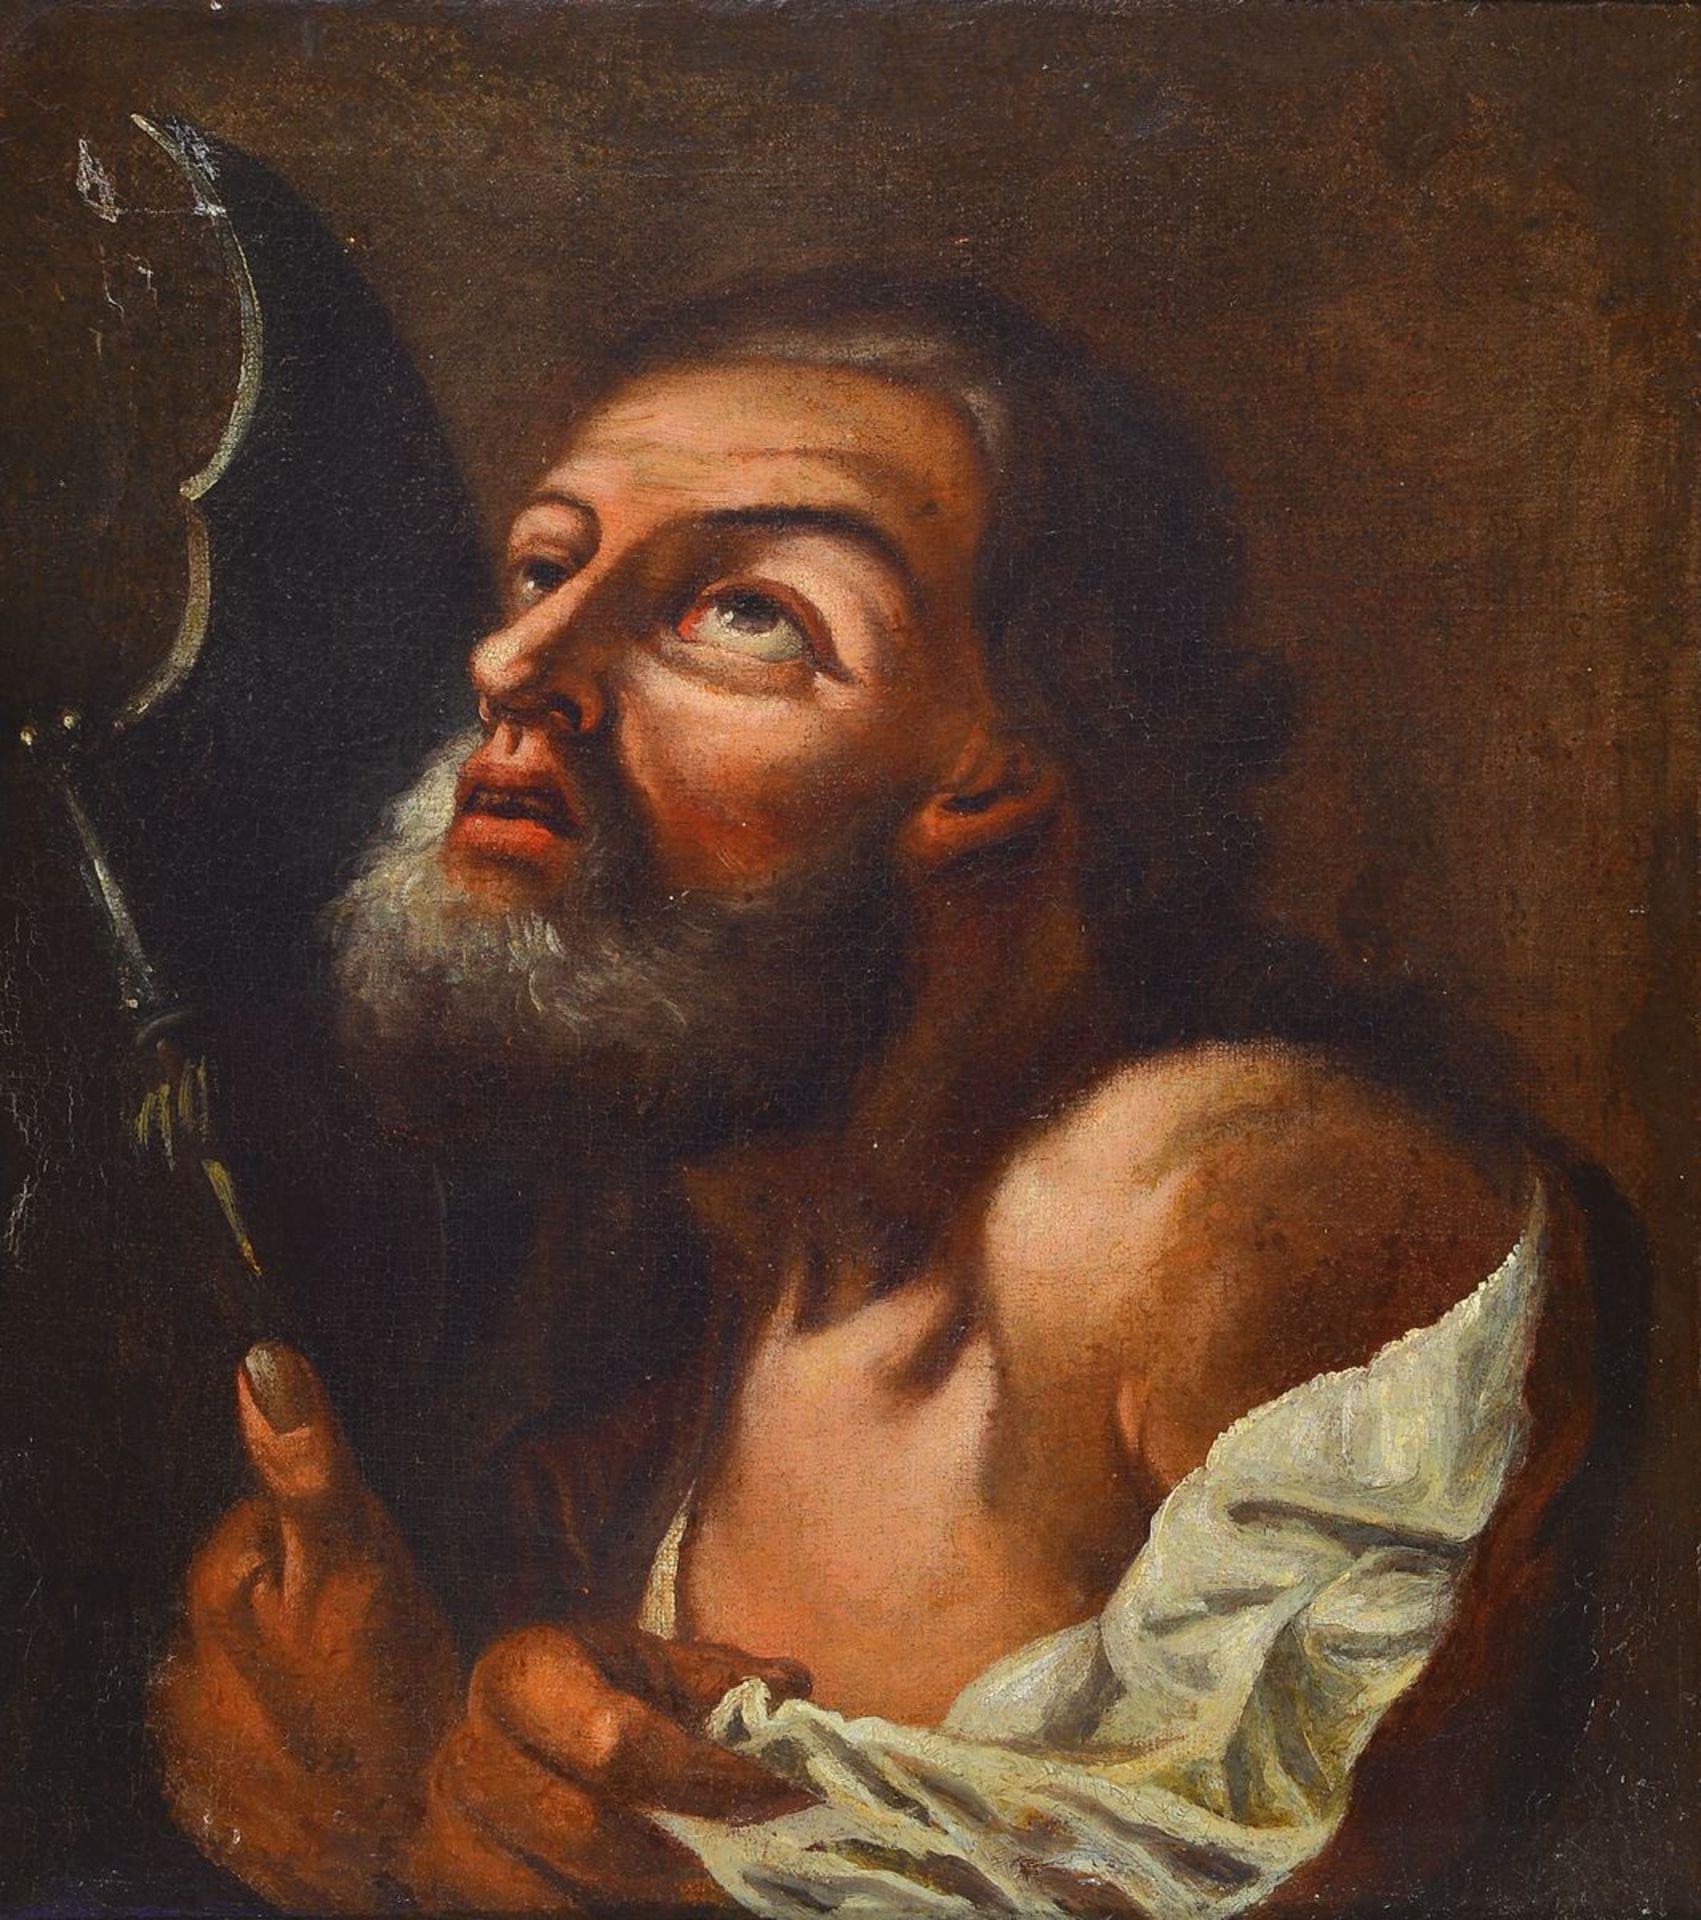 Unidentified artist, based on the Italian model after (Rizzi), around 1770/80, God fearing,